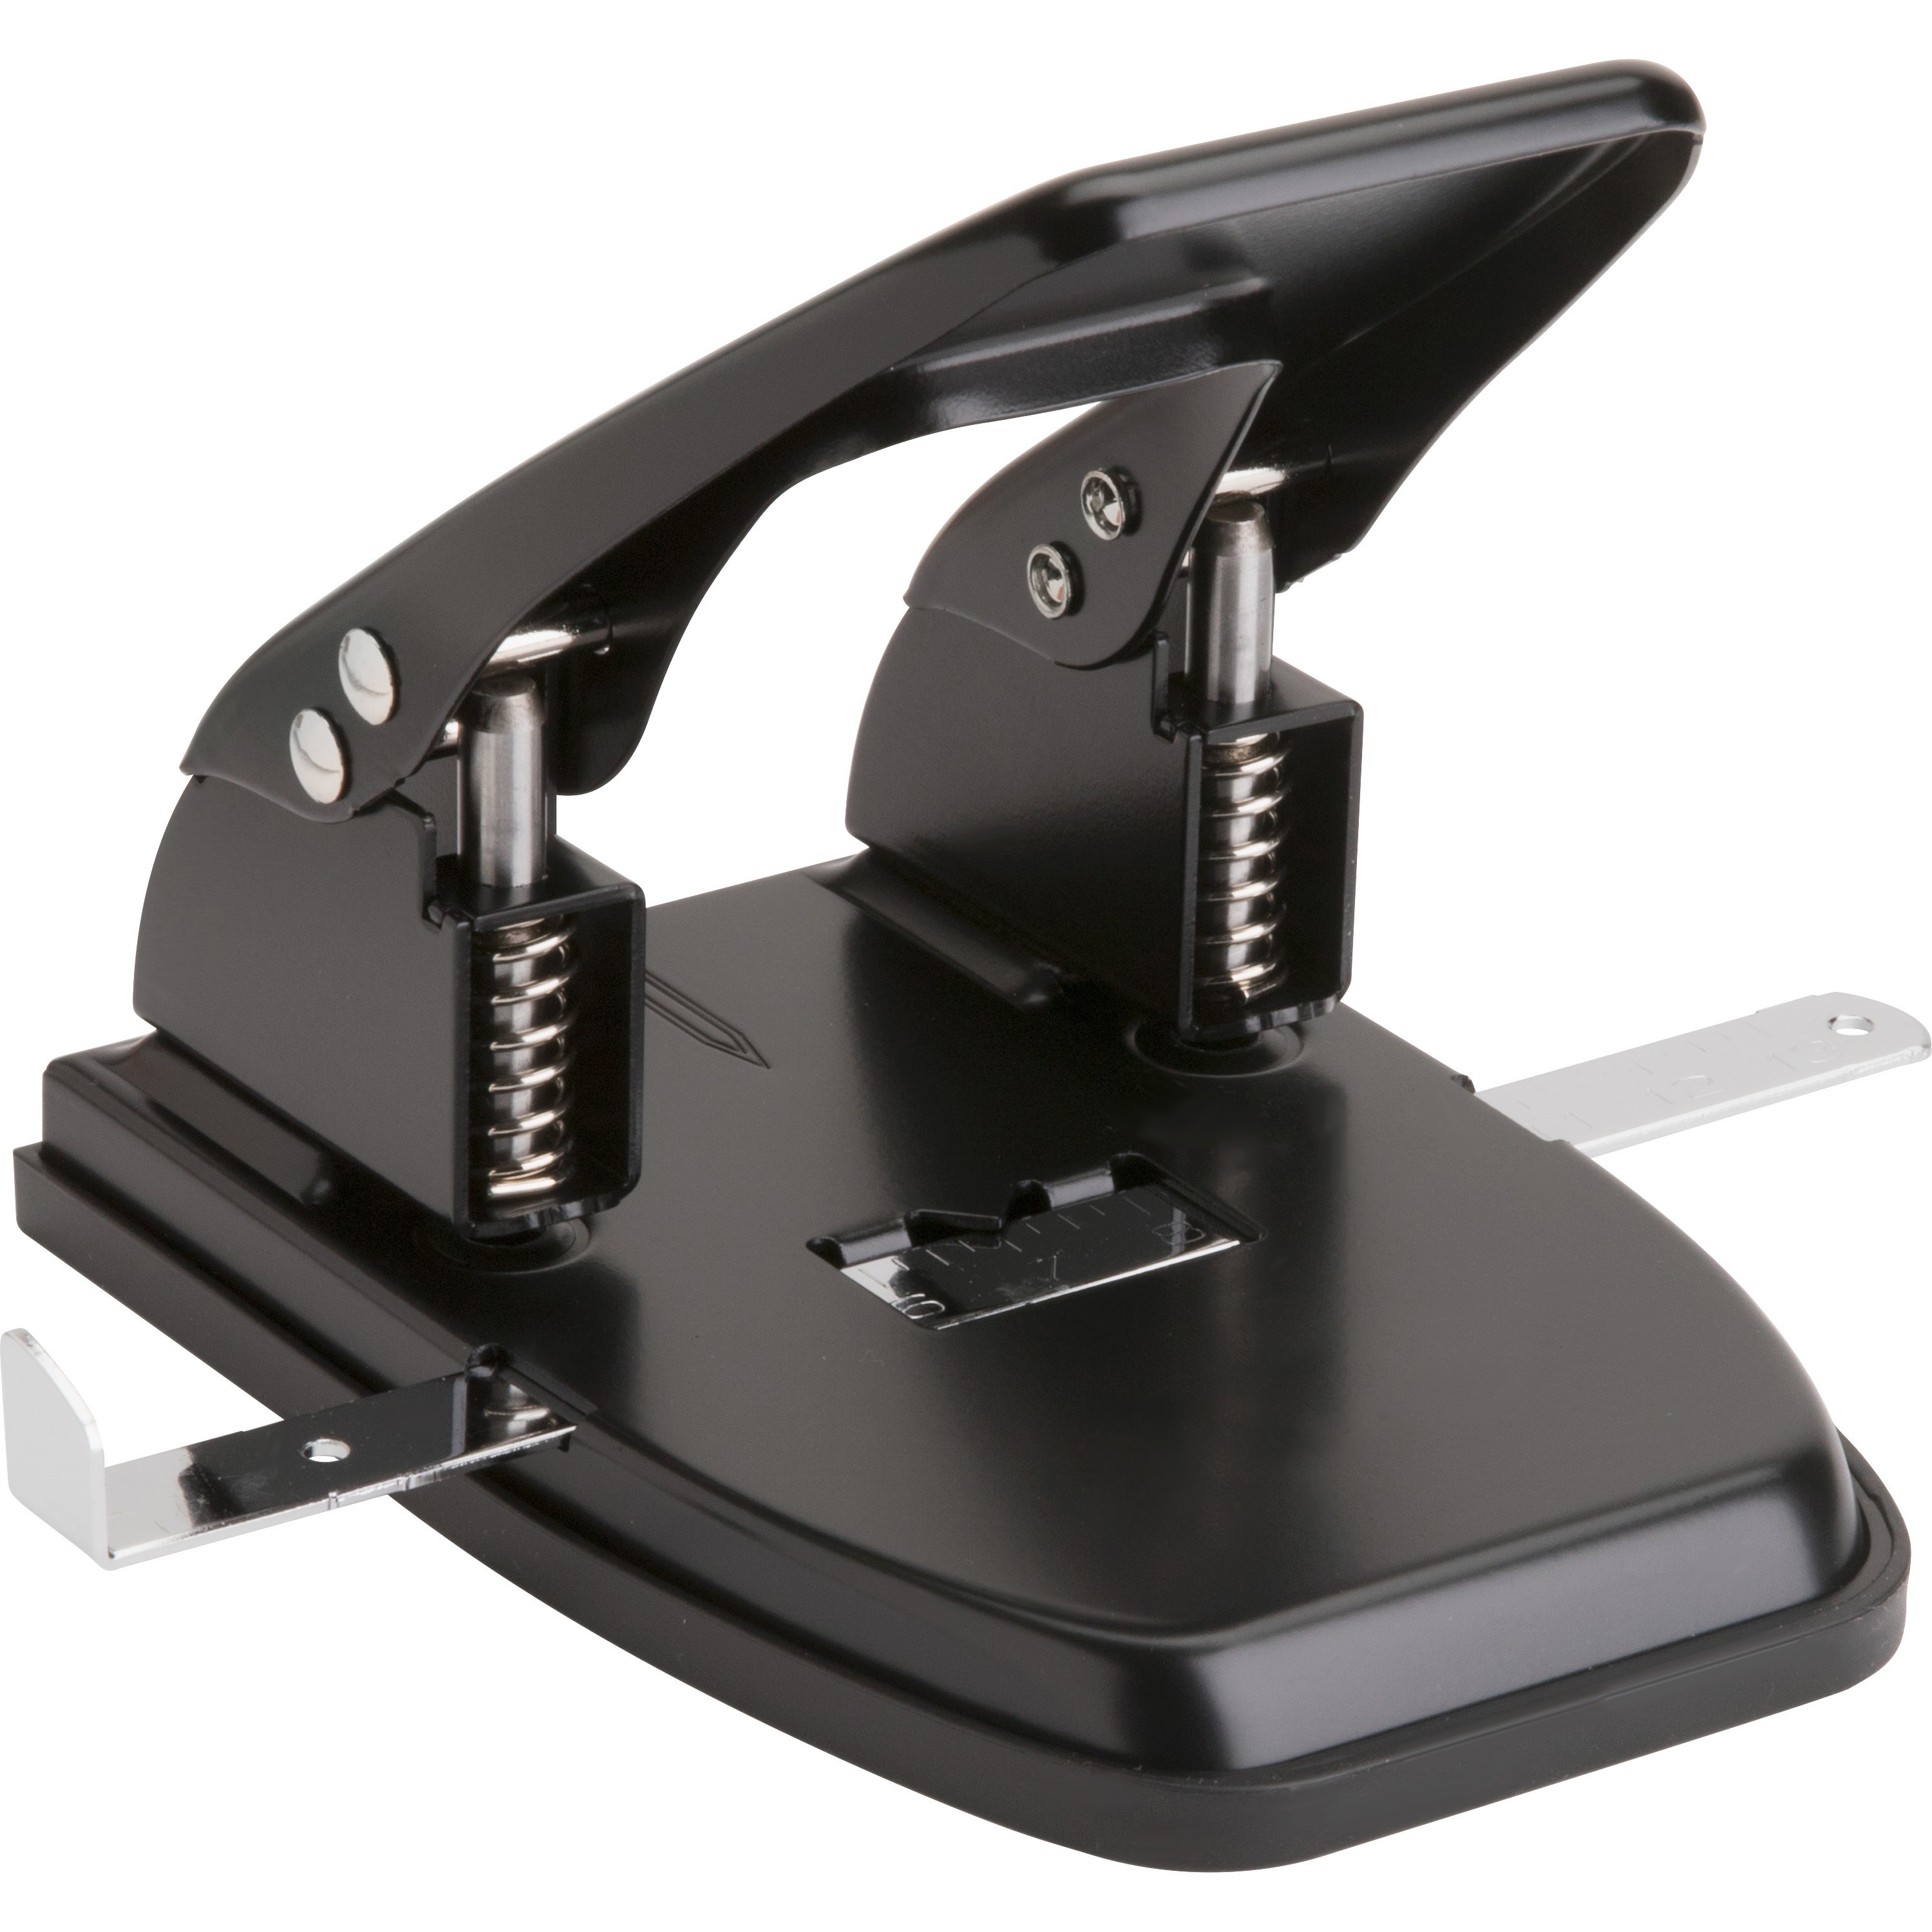 Business Source 65626 Heavy-duty Hole Punch Bsn65626 for sale online